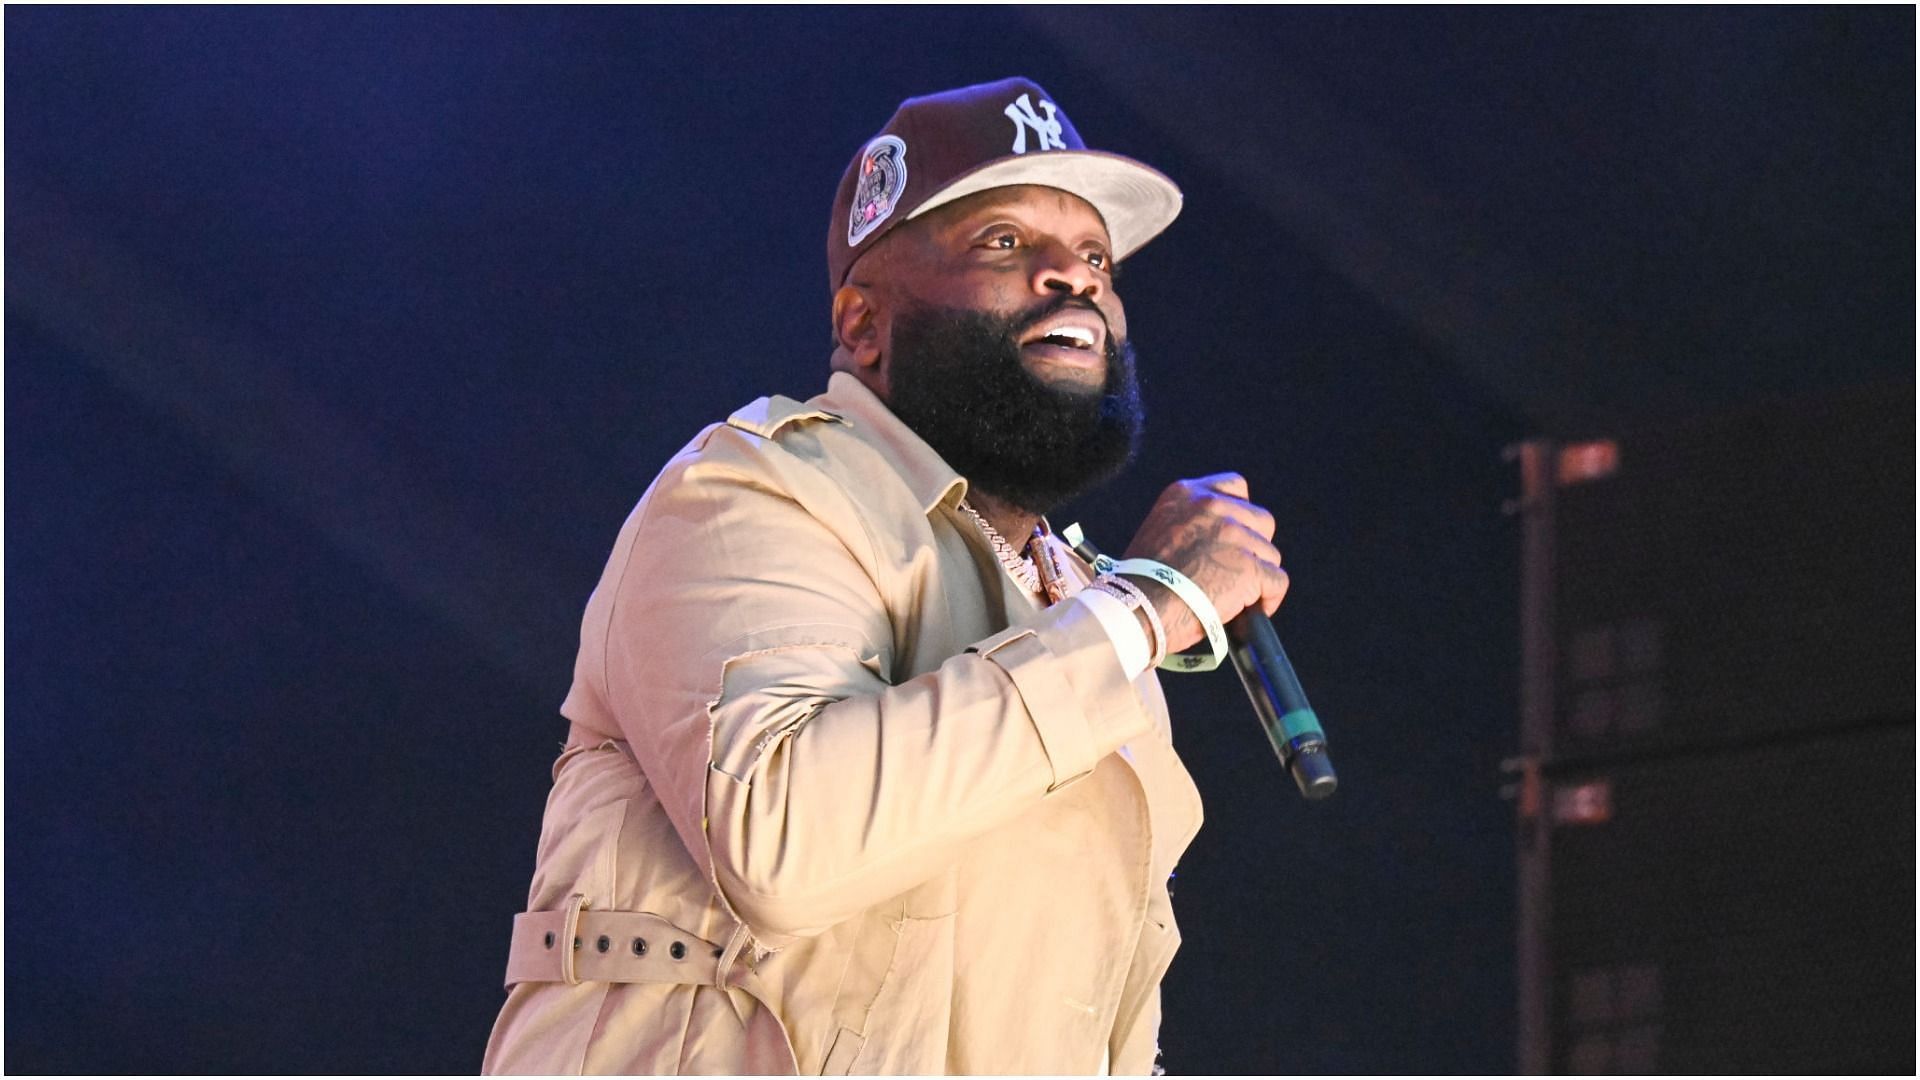 Rick Ross performs at the Rolling Loud NYC music festival in Citi Field (Image by Astrida Valigorsky via Getty Images)